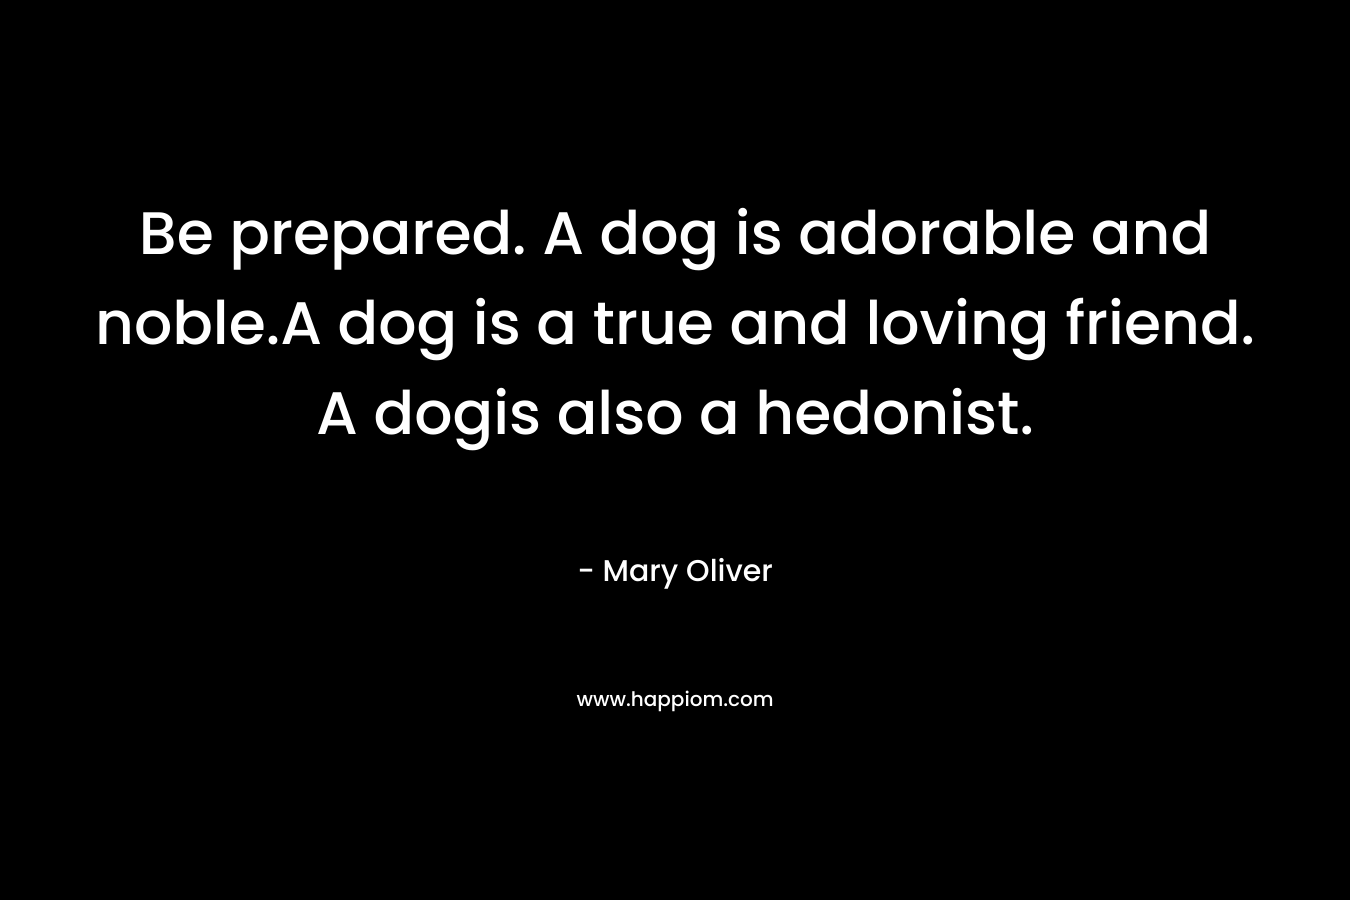 Be prepared. A dog is adorable and noble.A dog is a true and loving friend. A dogis also a hedonist.